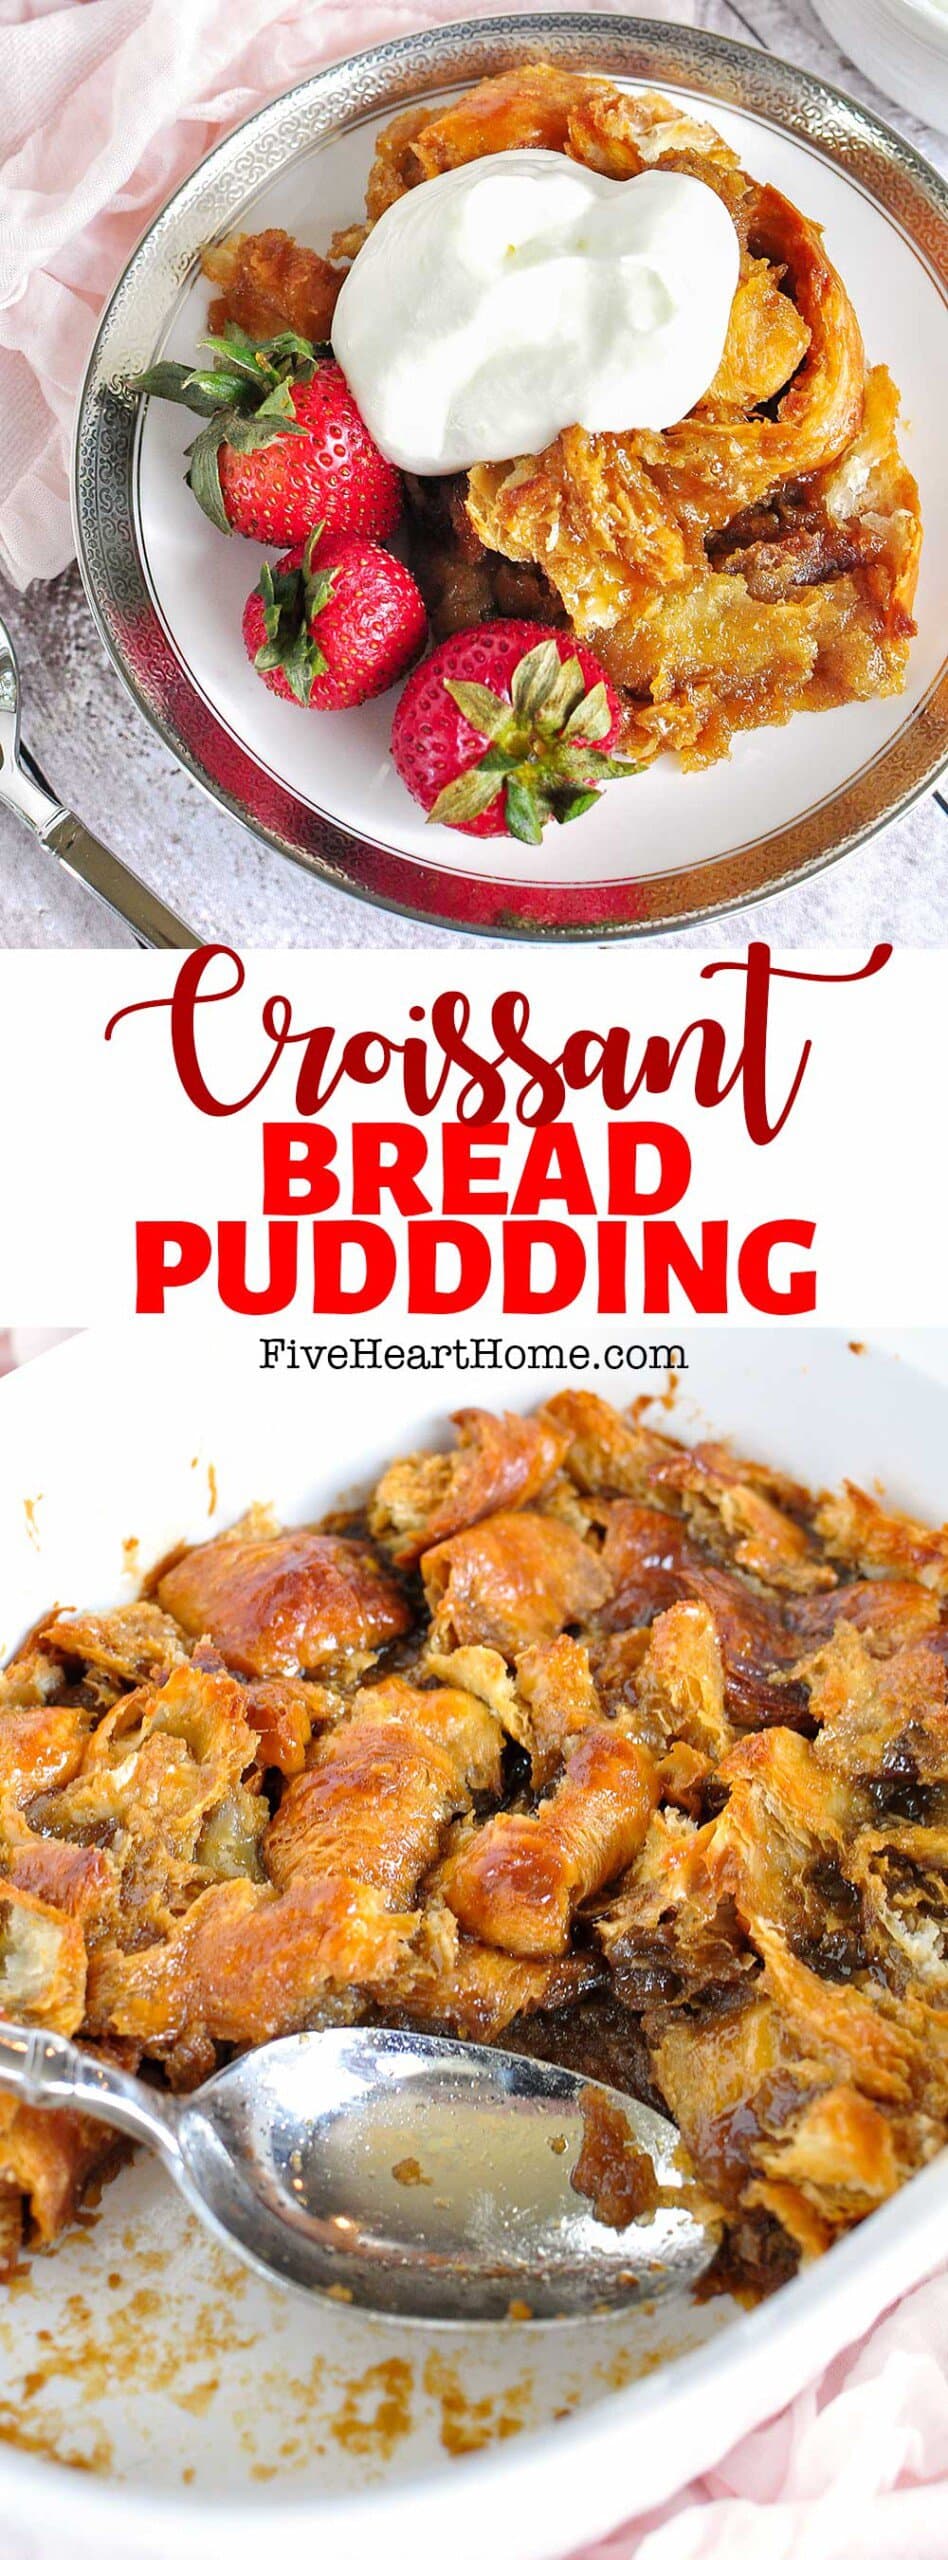 Croissant Bread Pudding ~ decadent yet simple, featuring an easy, homemade, 5-minute caramel sauce for the perfect recipe to use up stale or leftover croissants! | FiveHeartHome.com via @fivehearthome